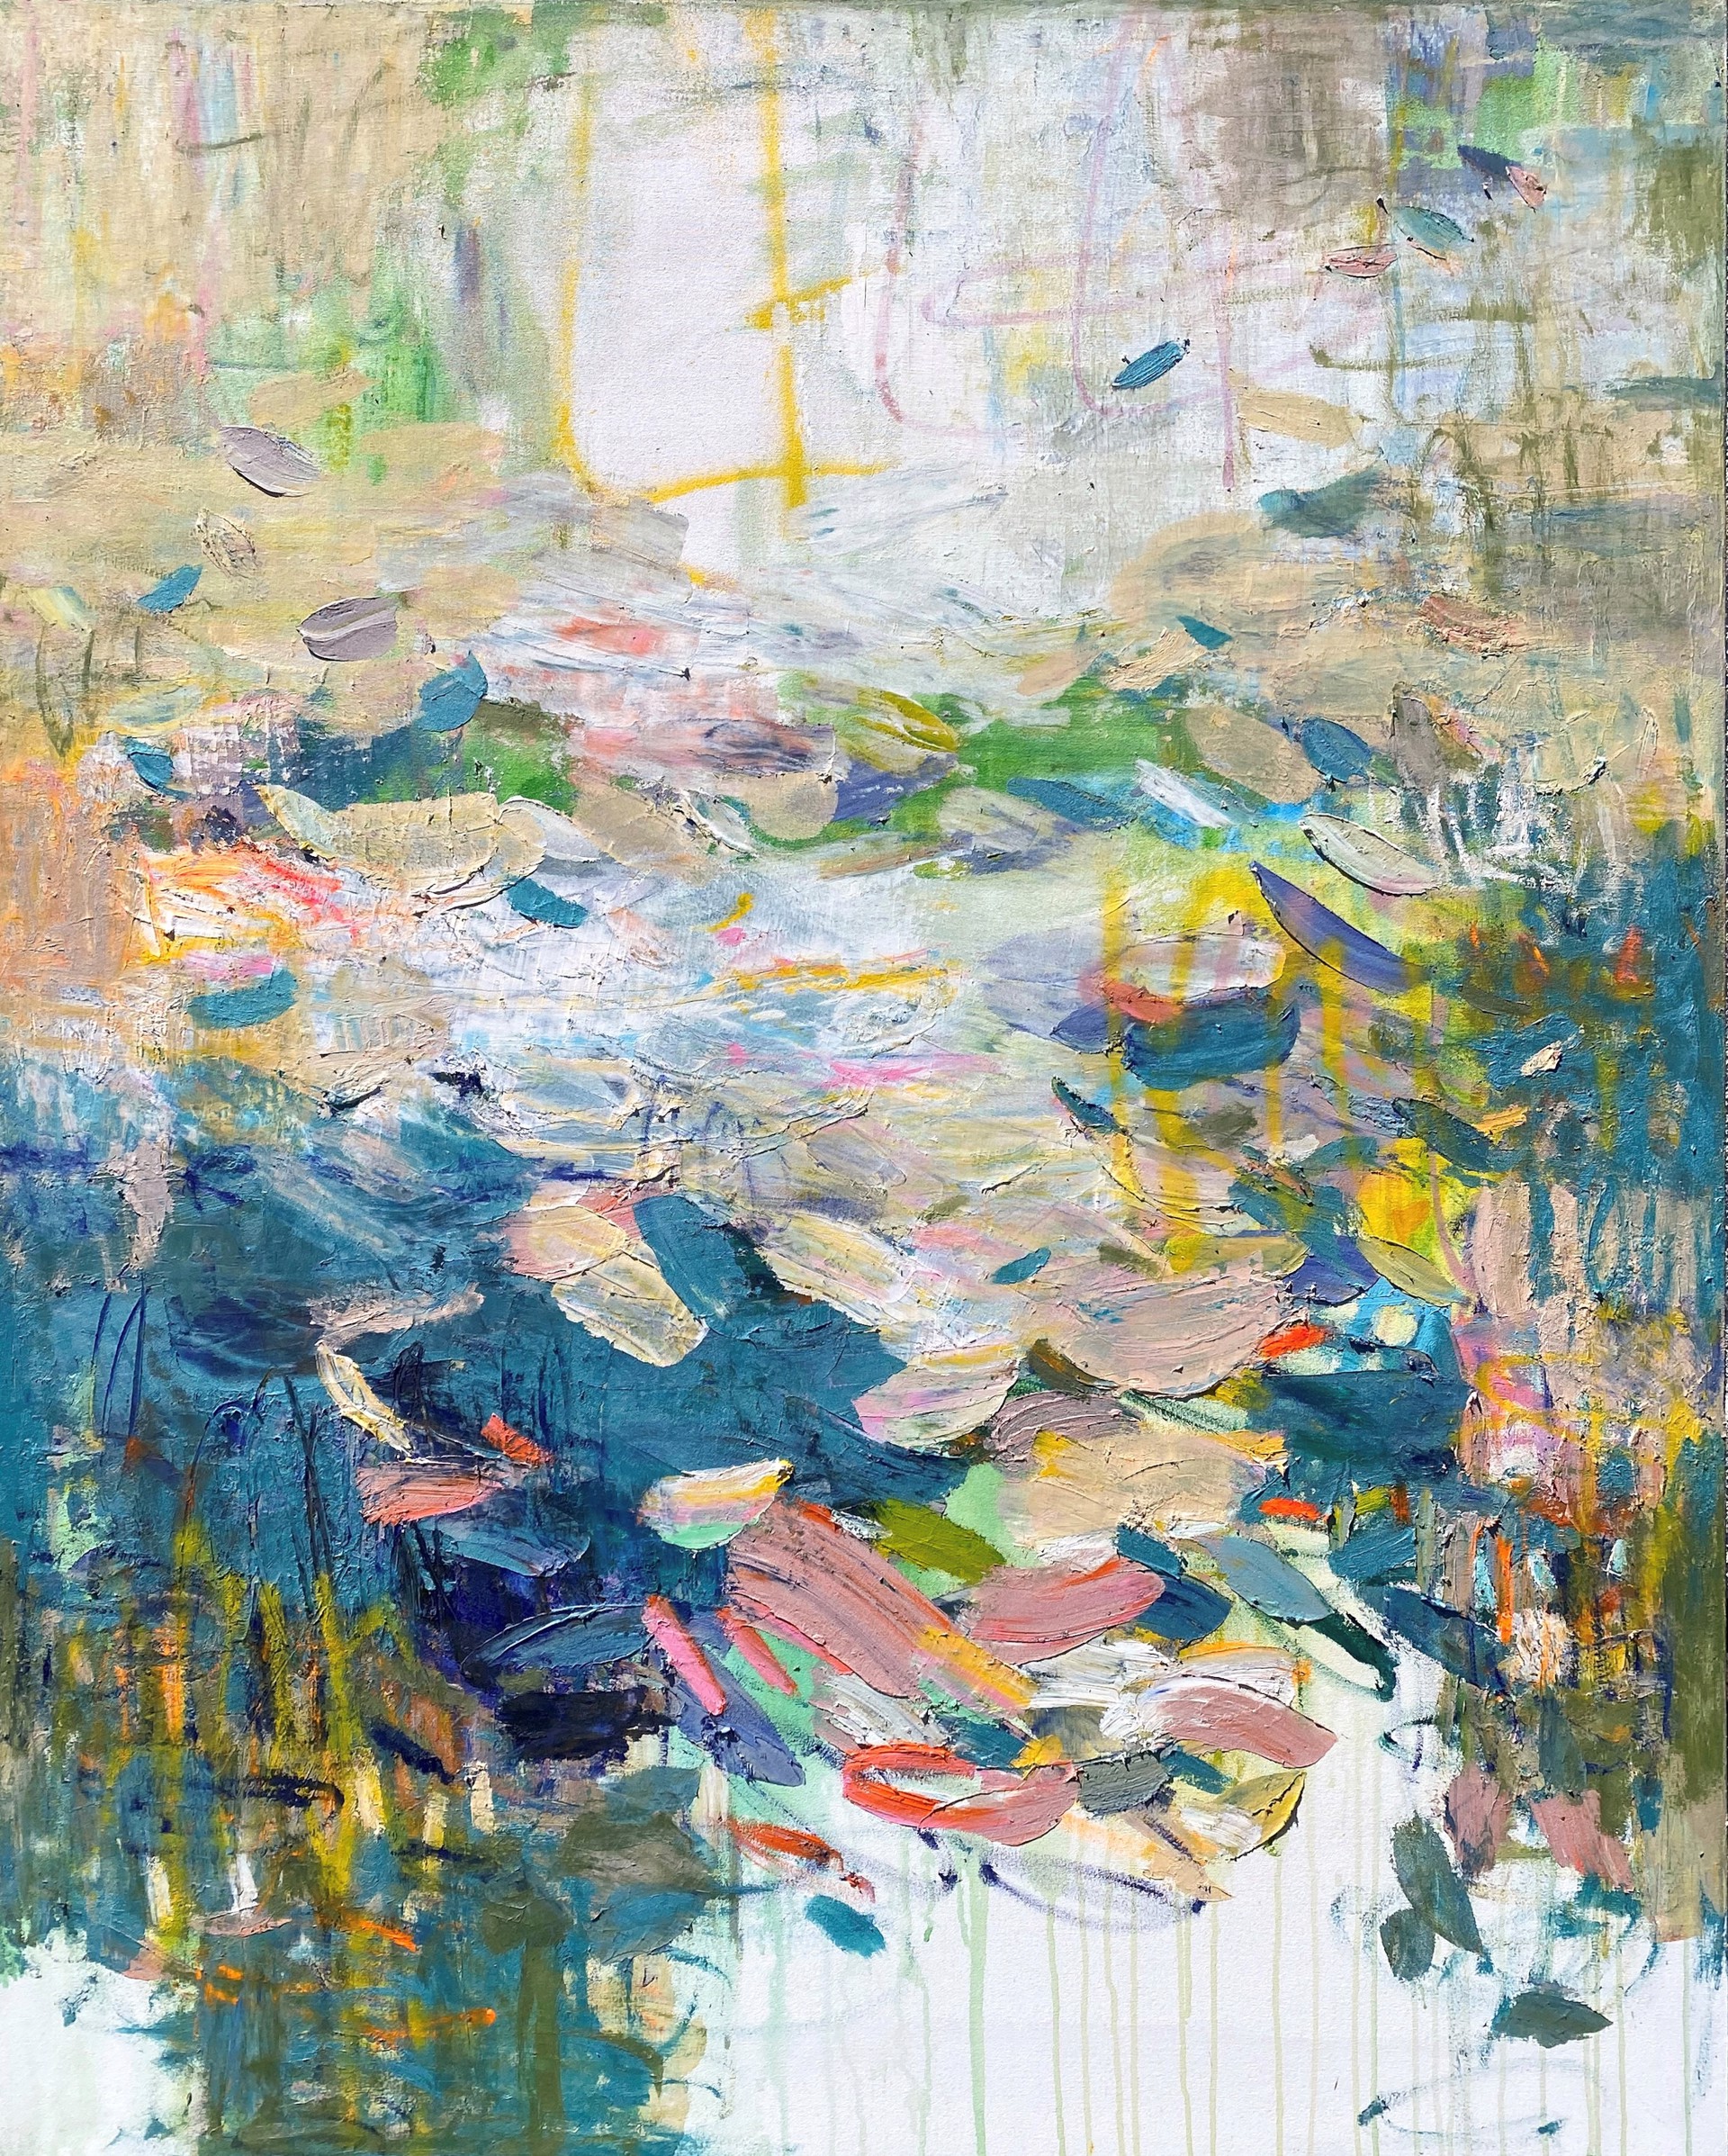 Amy Donalson's oil painting "Loving in the Light" is a beautiful example of abstract impressionism. The painting features vibrant colors and bold brushstrokes.